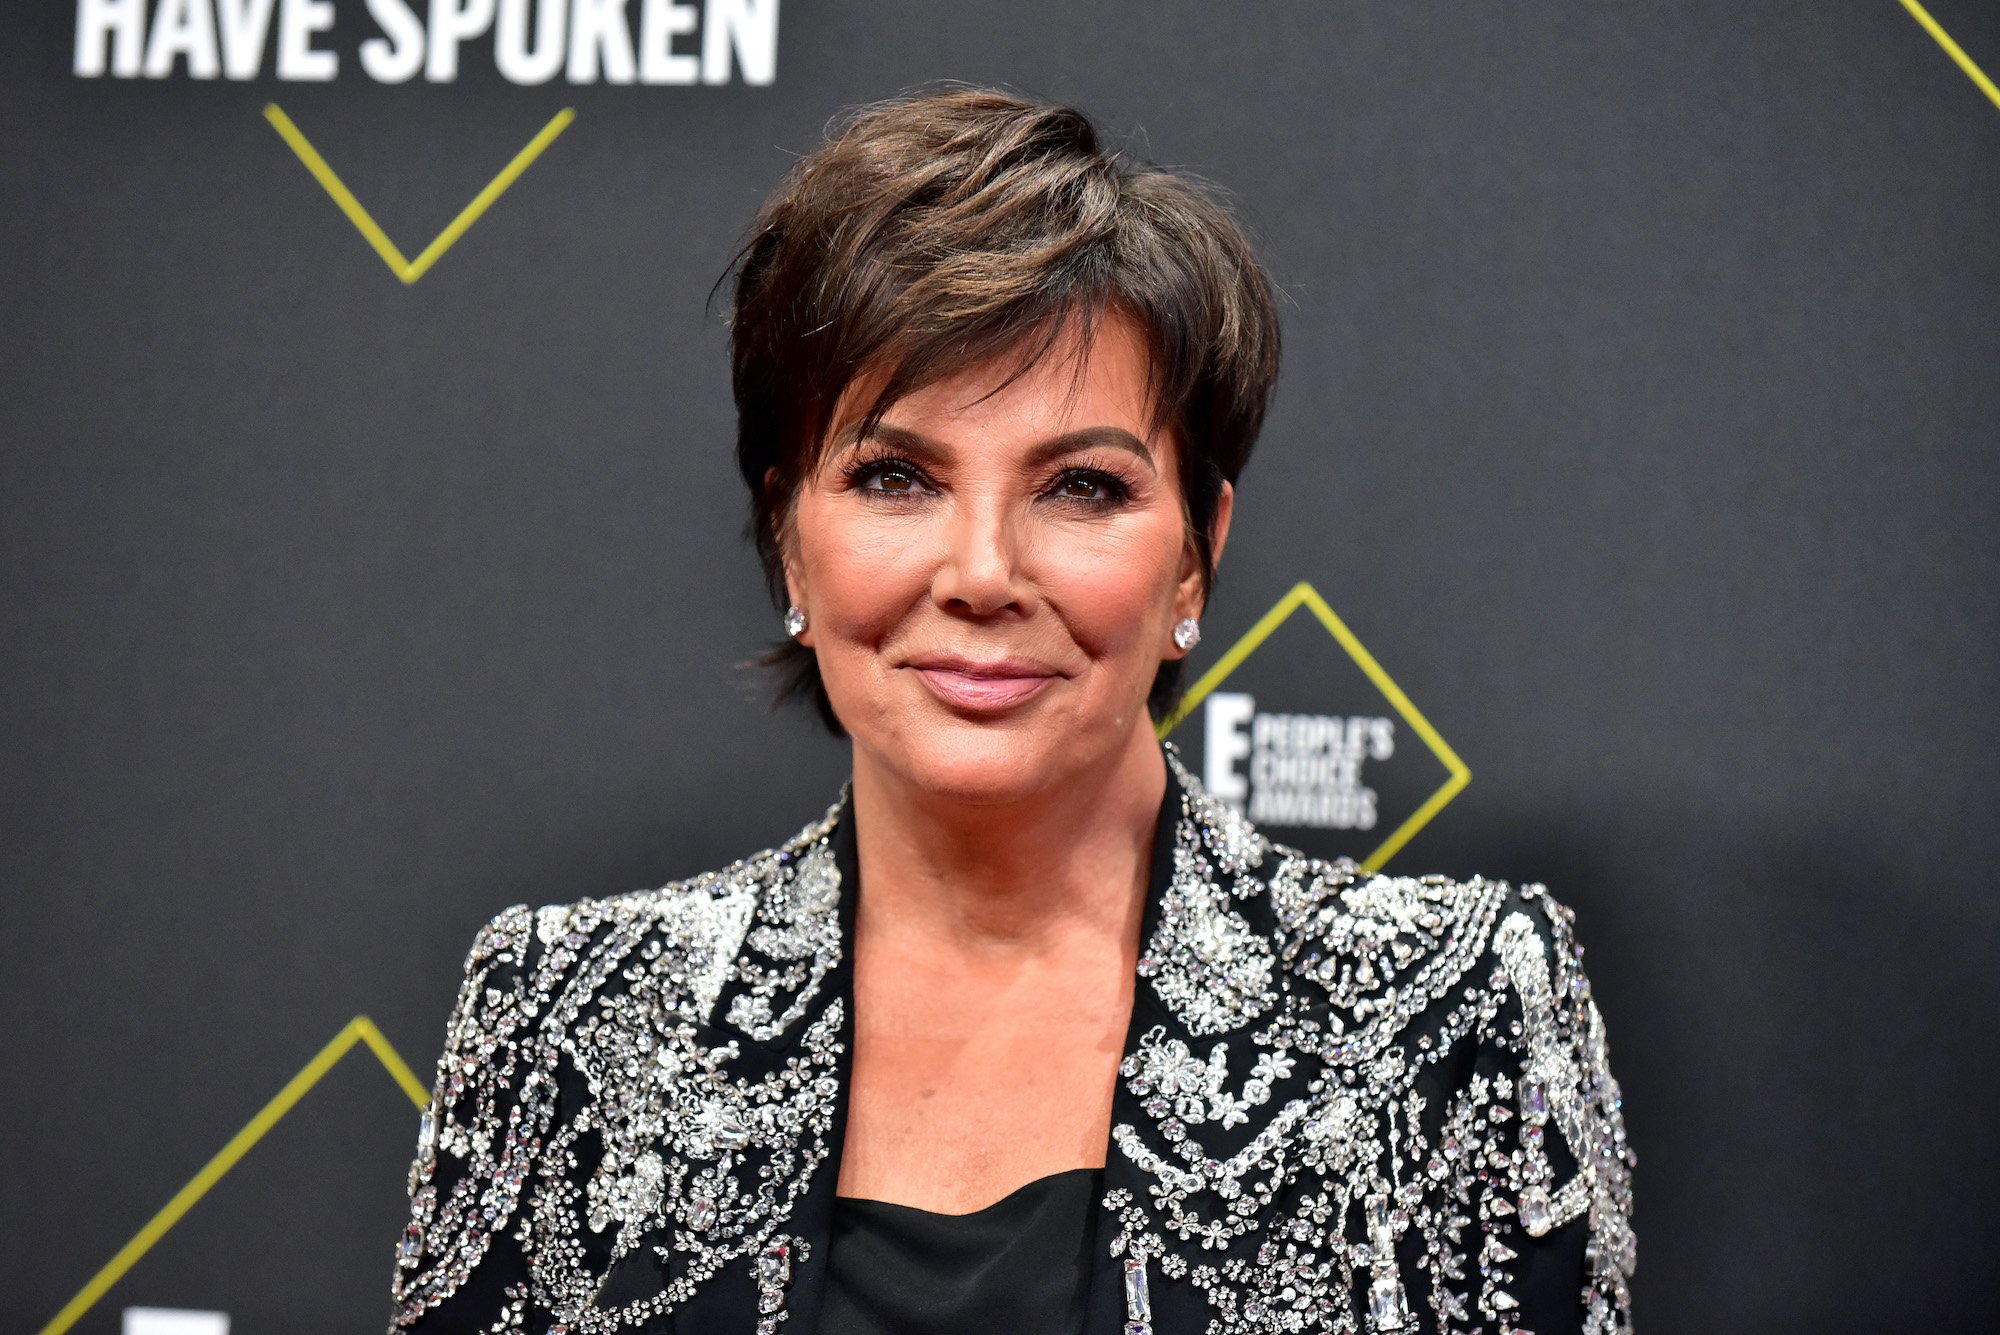 Kris Jenner Always Dreamed of Having a Big House — and a Big Family to Fill It